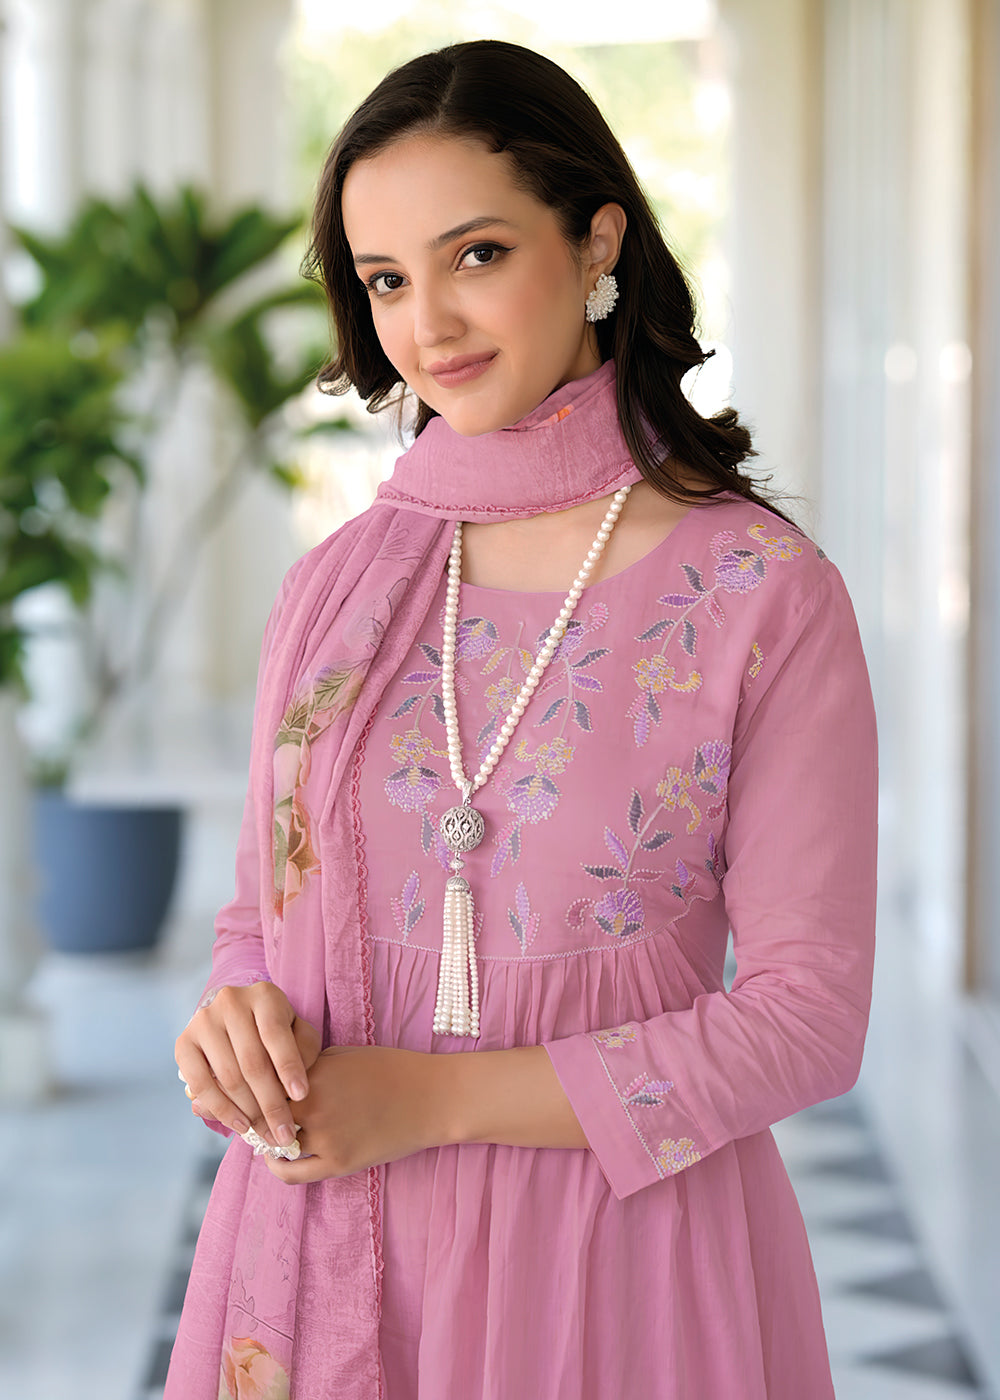 Buy Now Graceful Pink Mal Mal Cotton Salwar Suit Online in USA, UK, Canada, Germany, Australia & Worldwide at Empress Clothing. 